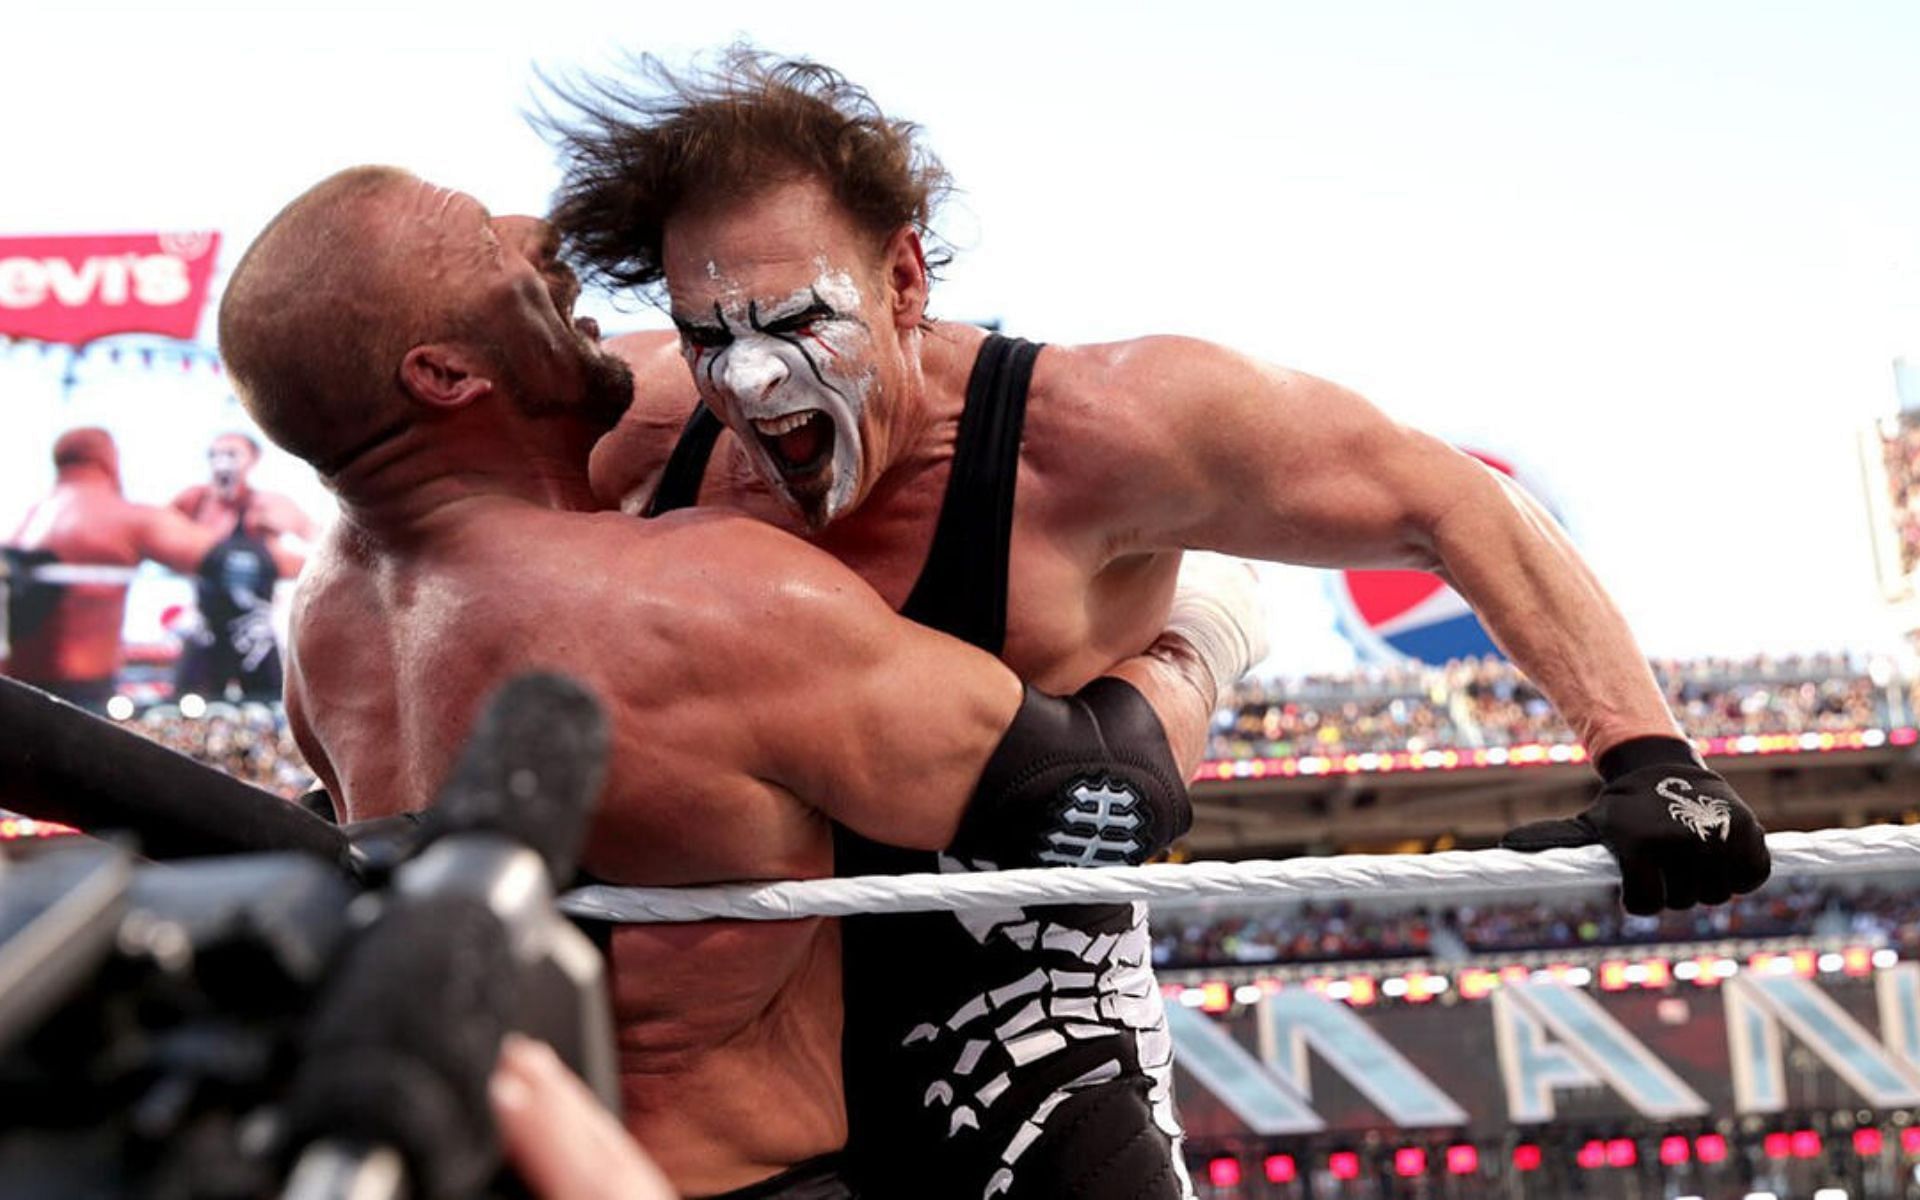 Sting with the big splash on Triple H at WrestleMania 31!